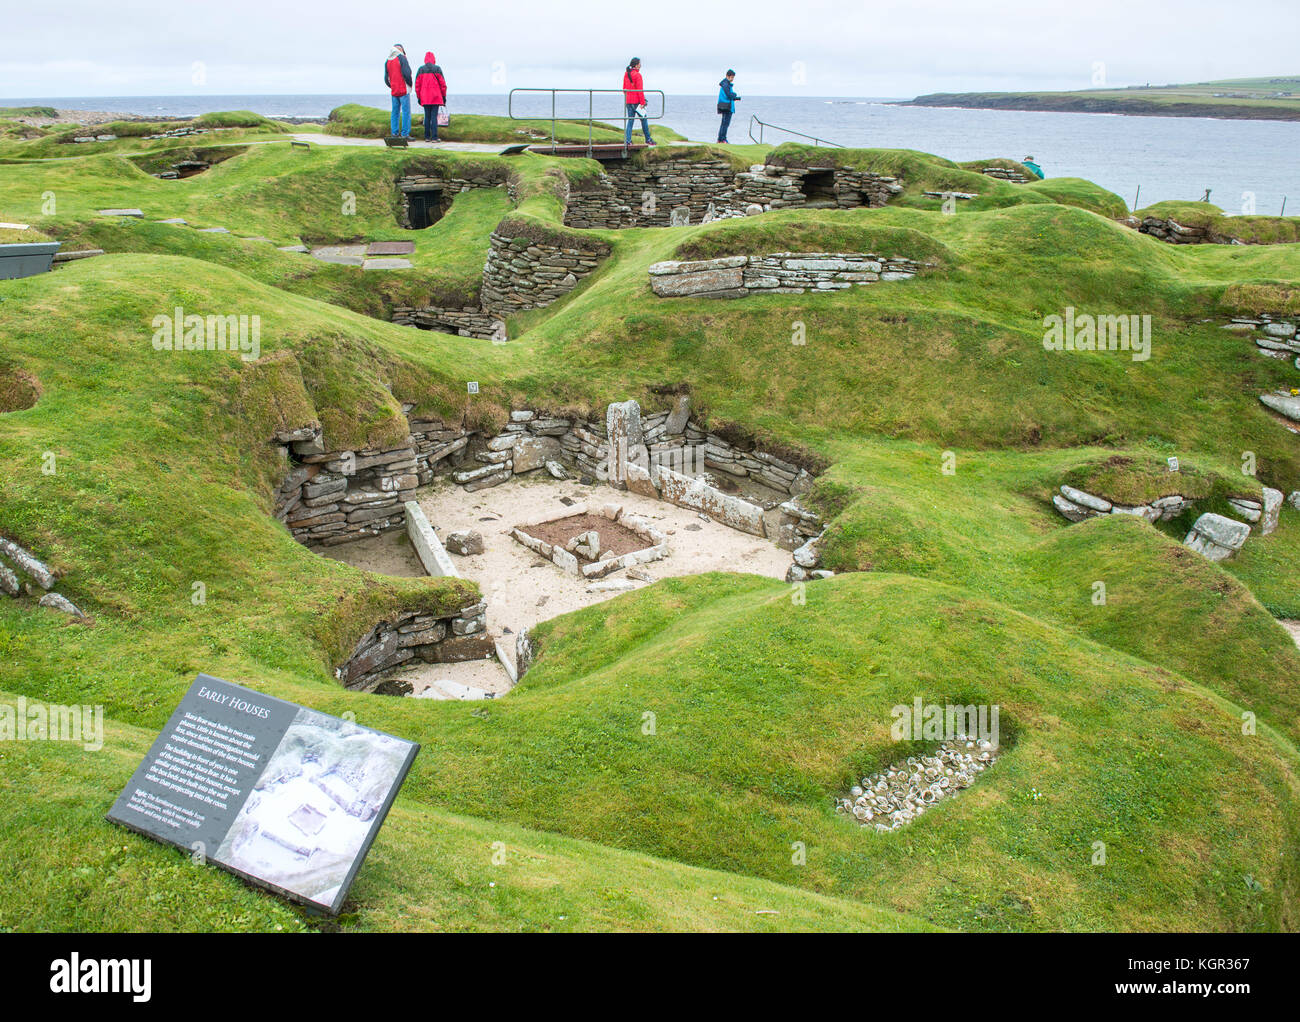 Skara Brae, a stone-built Neolithic village located on the Bay of Skaill on the west coast of the Orkney Islands in Scotland. Stock Photo